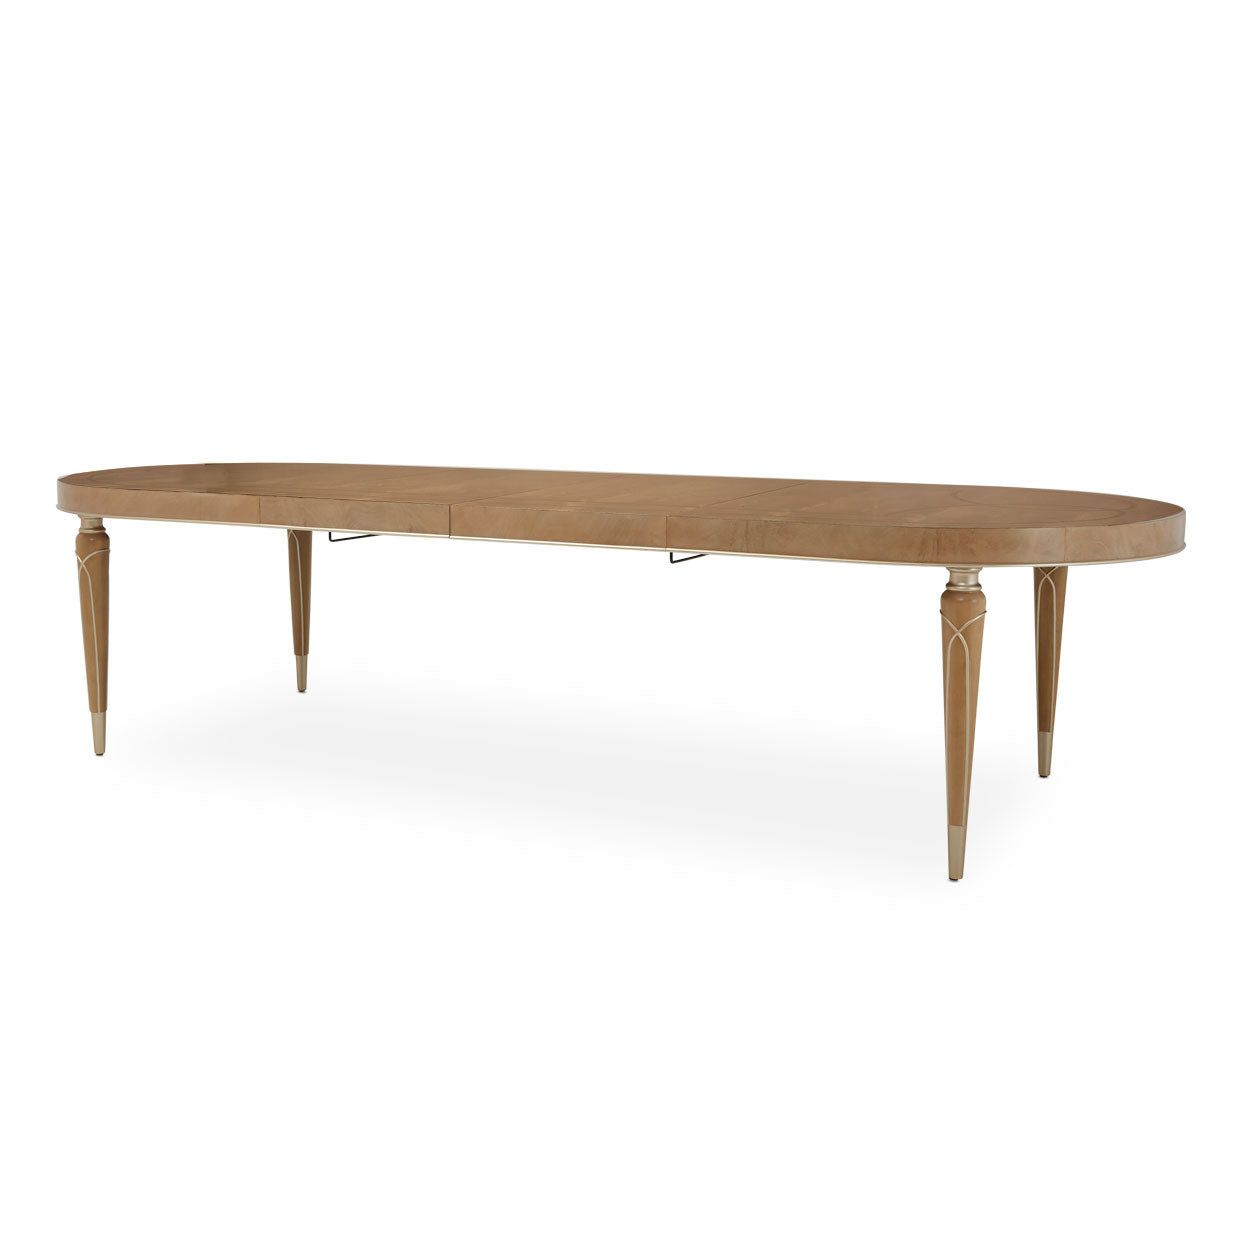 4 Leg Oval Dining Table (Includes: 2 X 22 Leaves) - Dreamart Gallery